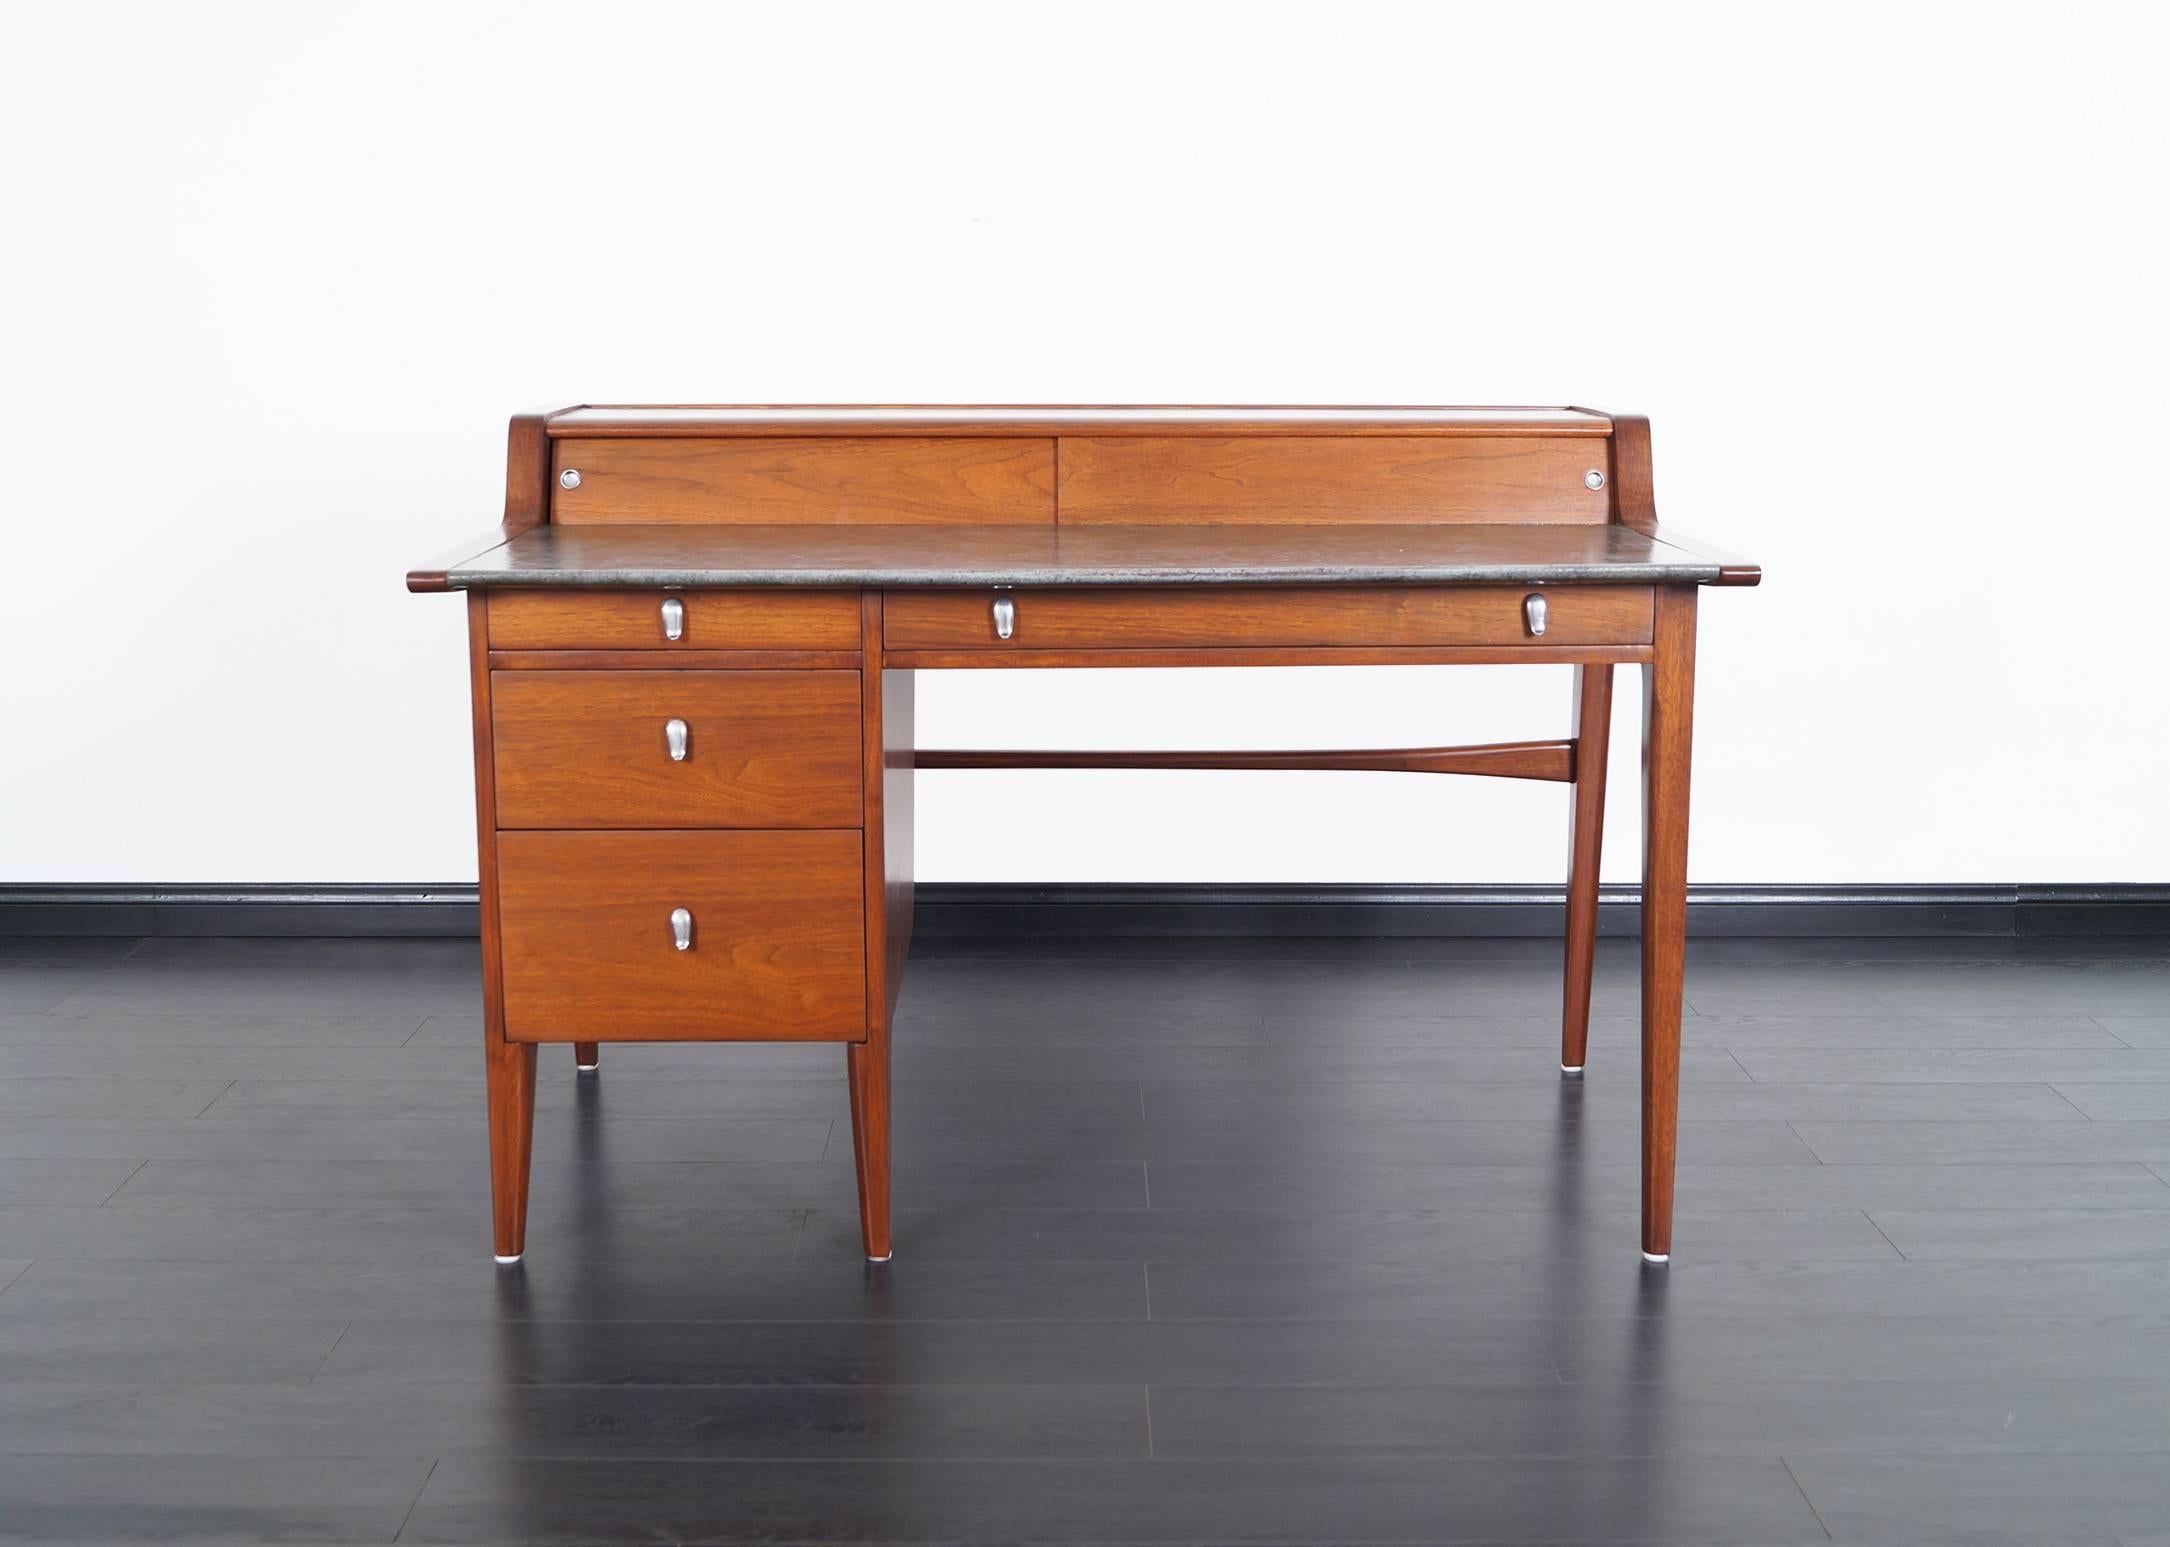 This modernist desk derives it's beauty from it's line and incredible craftsmanship. It was designed by John Van Koert for the Drexel Profile series. The back is amazing as the front, so it can be displayed in the middle of a room. Desk features a